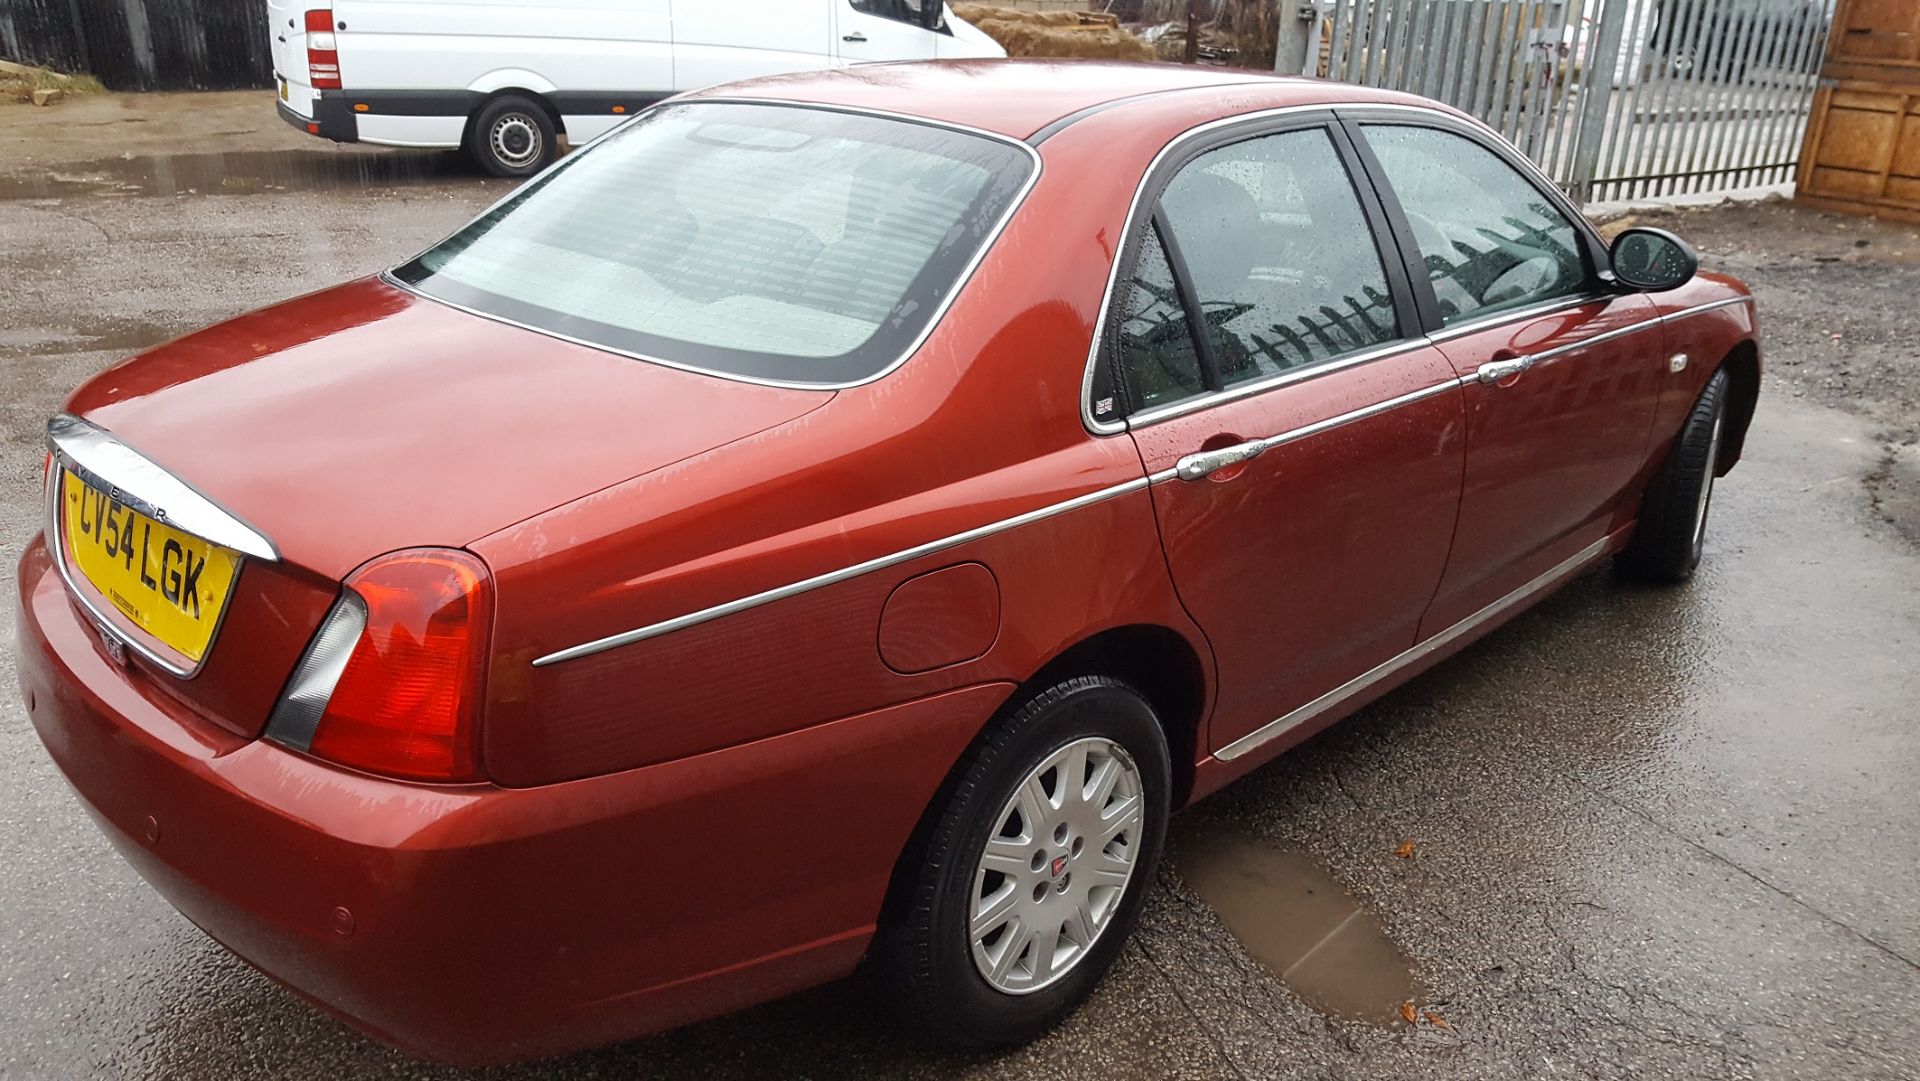 2004/54 REG ROVER 75 CLASSIC RED PETROL 4 DOOR SALOON, SHOWING 1 FORMER KEEPER *NO VAT* - Image 3 of 8